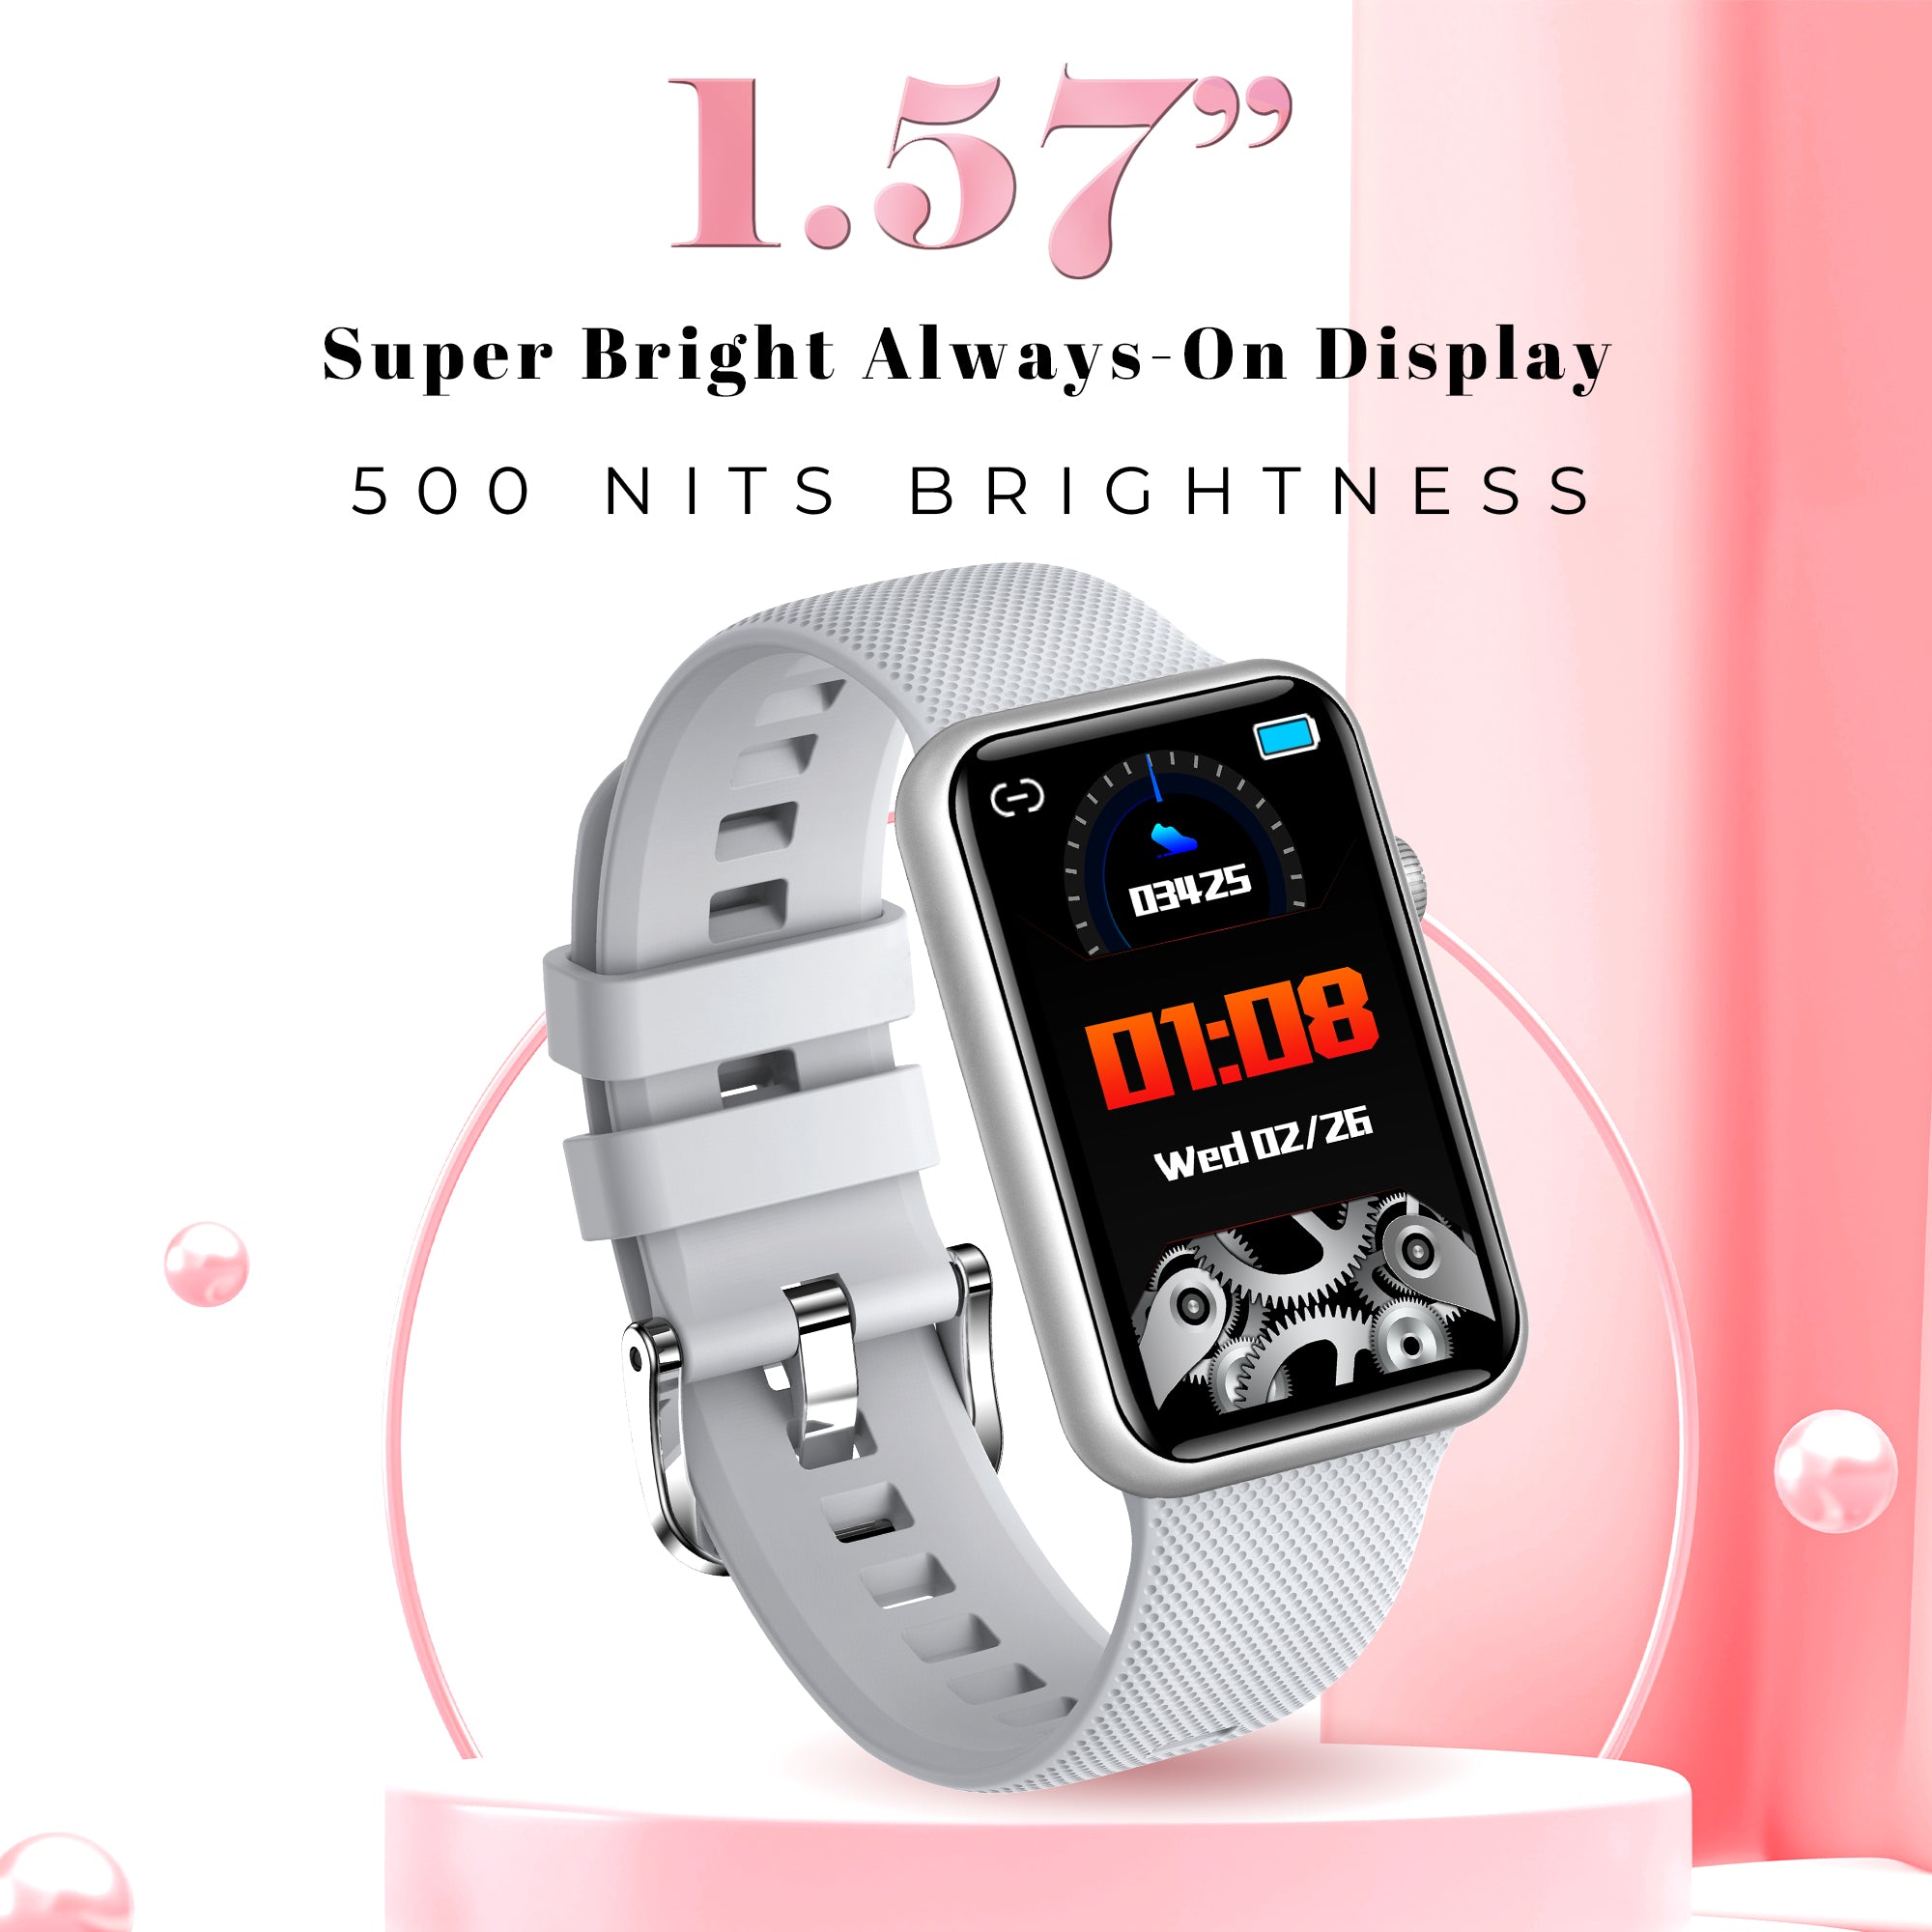 Gizmore Slate 3.98Cm (1.57)  IPS Full Touch BT Calling with AI Voice Assistance Smartwatch